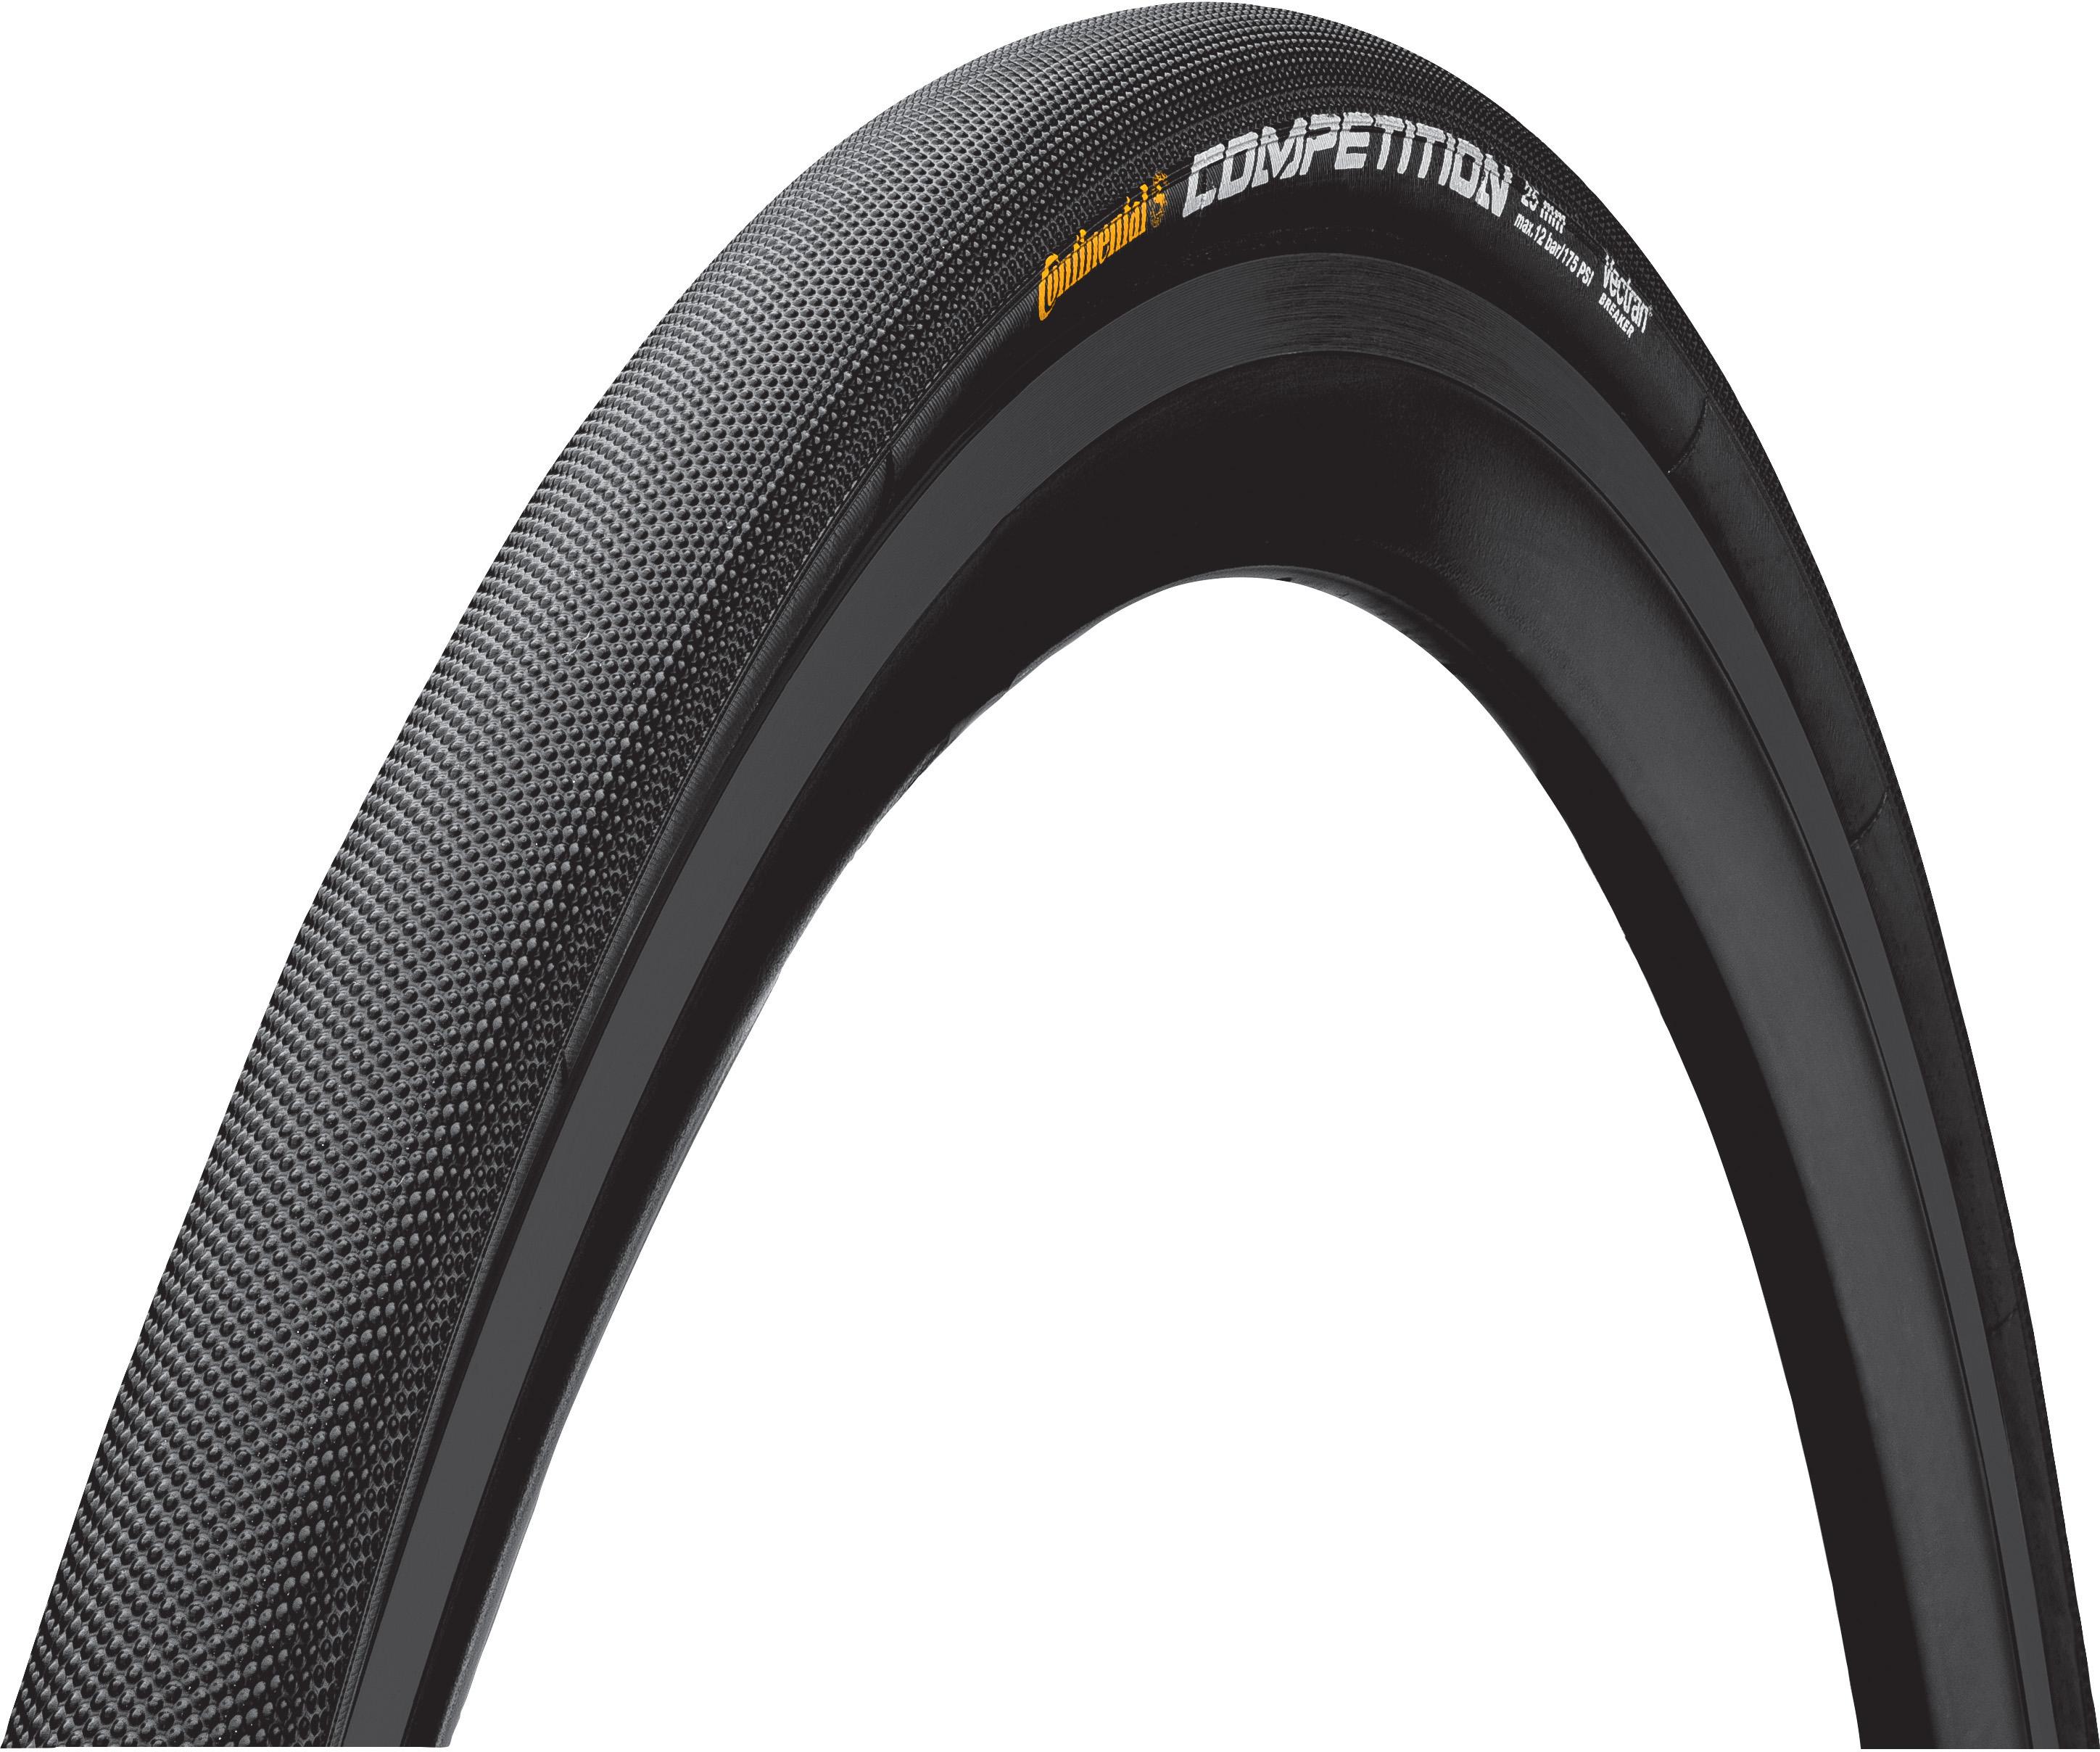 Continental Competition Tubular Tyre - Black